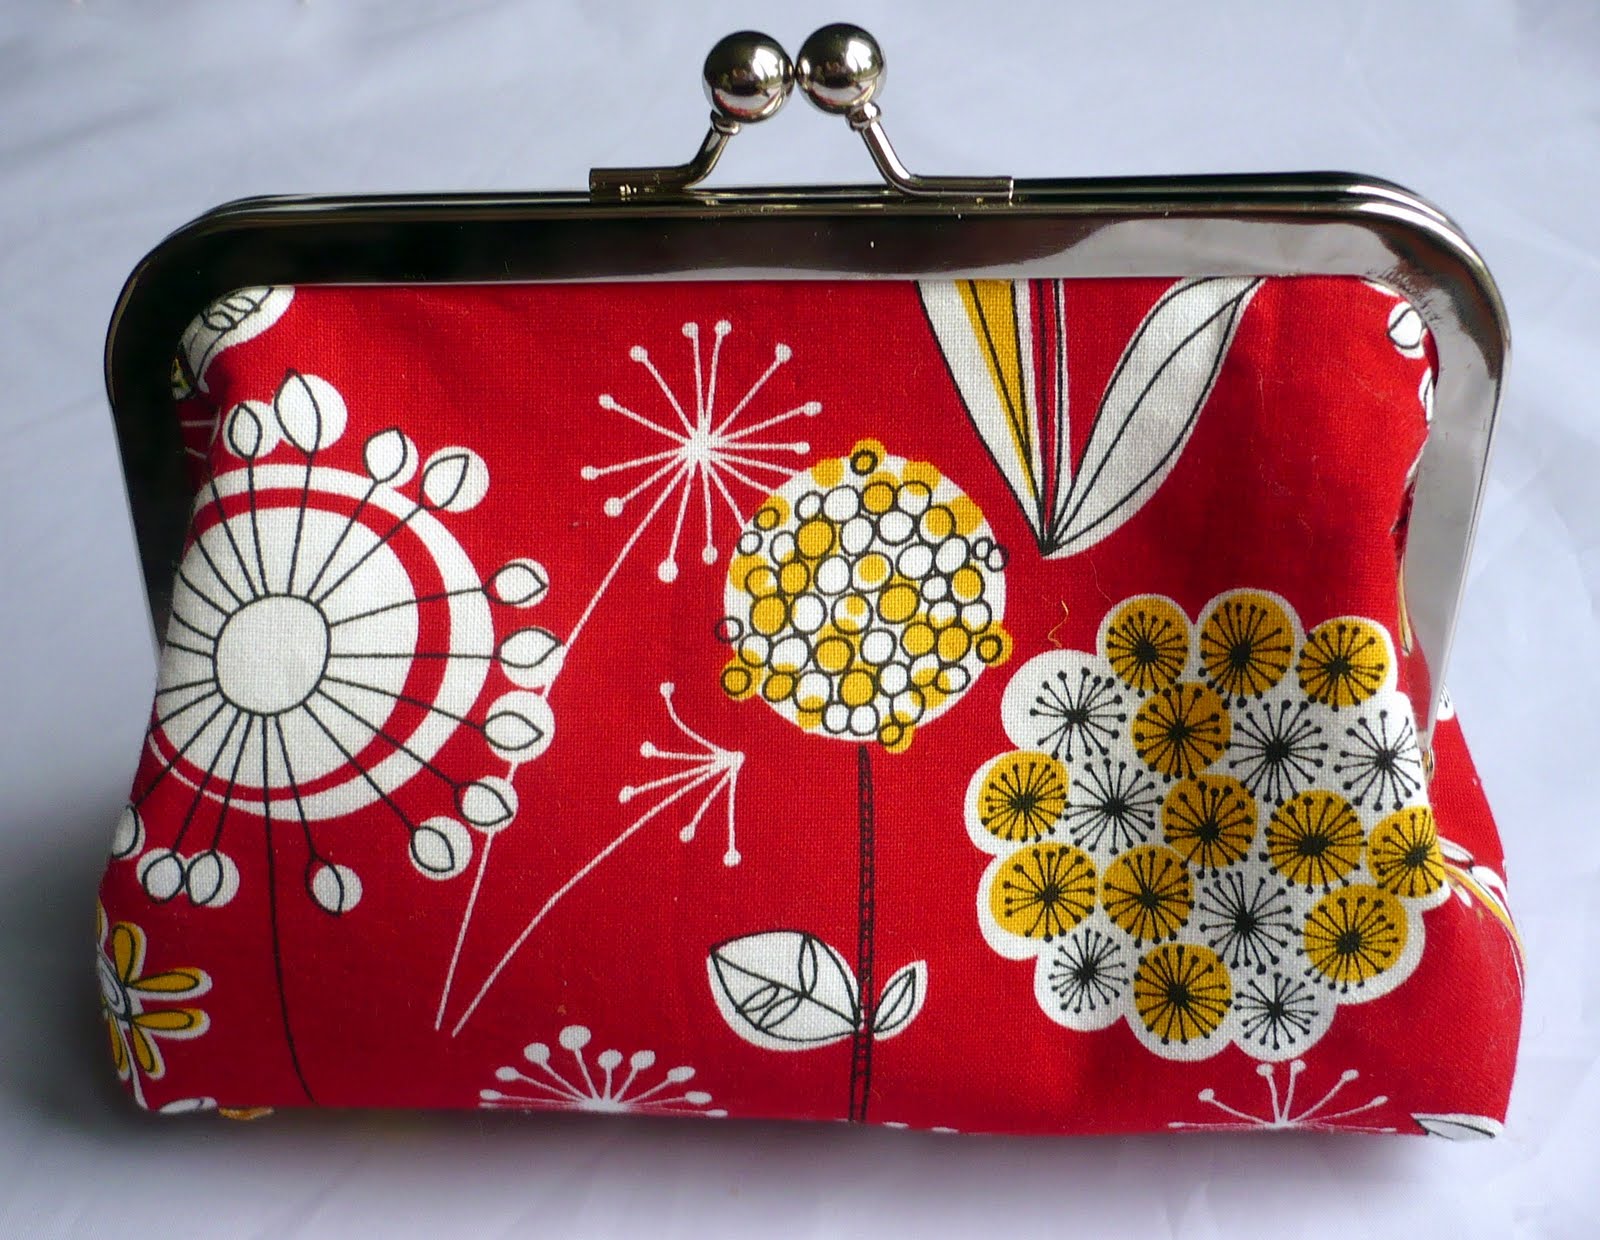 Stitched Together: Two Pretty Purses